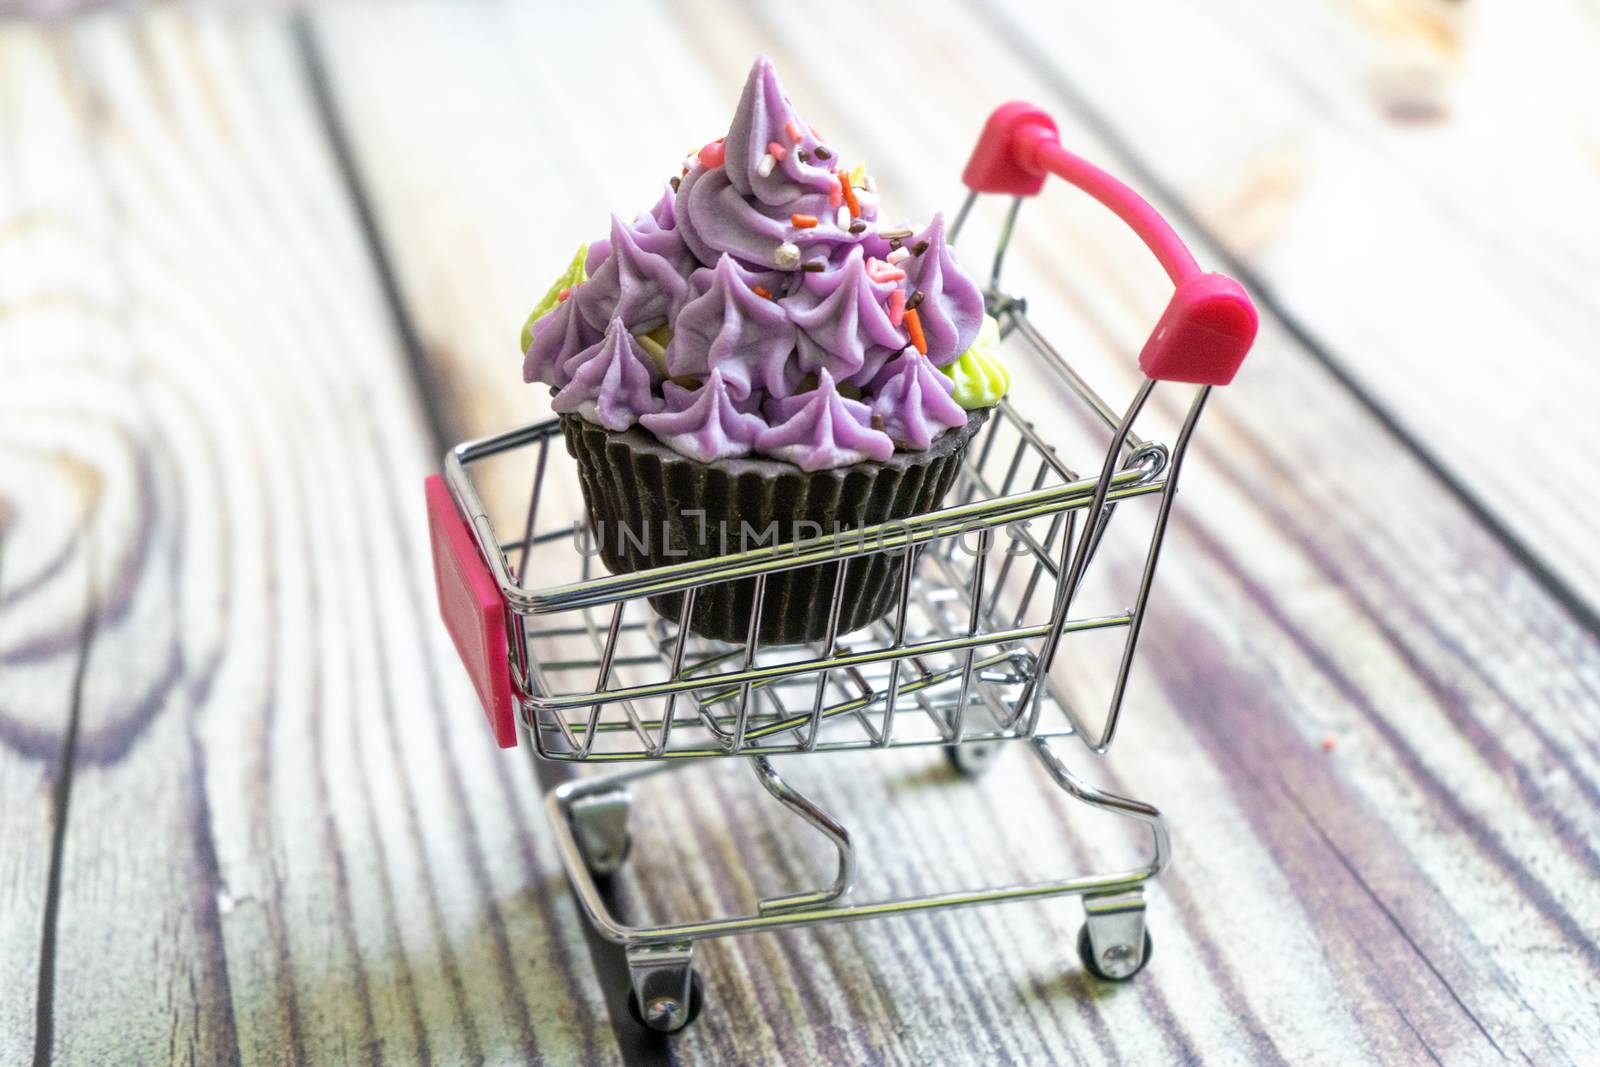 beautiful cupcake dessert sweet soap placed in a shopping cart on a wooden background. Shows hobbies and skills that people are learning in the pandemic. Shot with copyspace for text